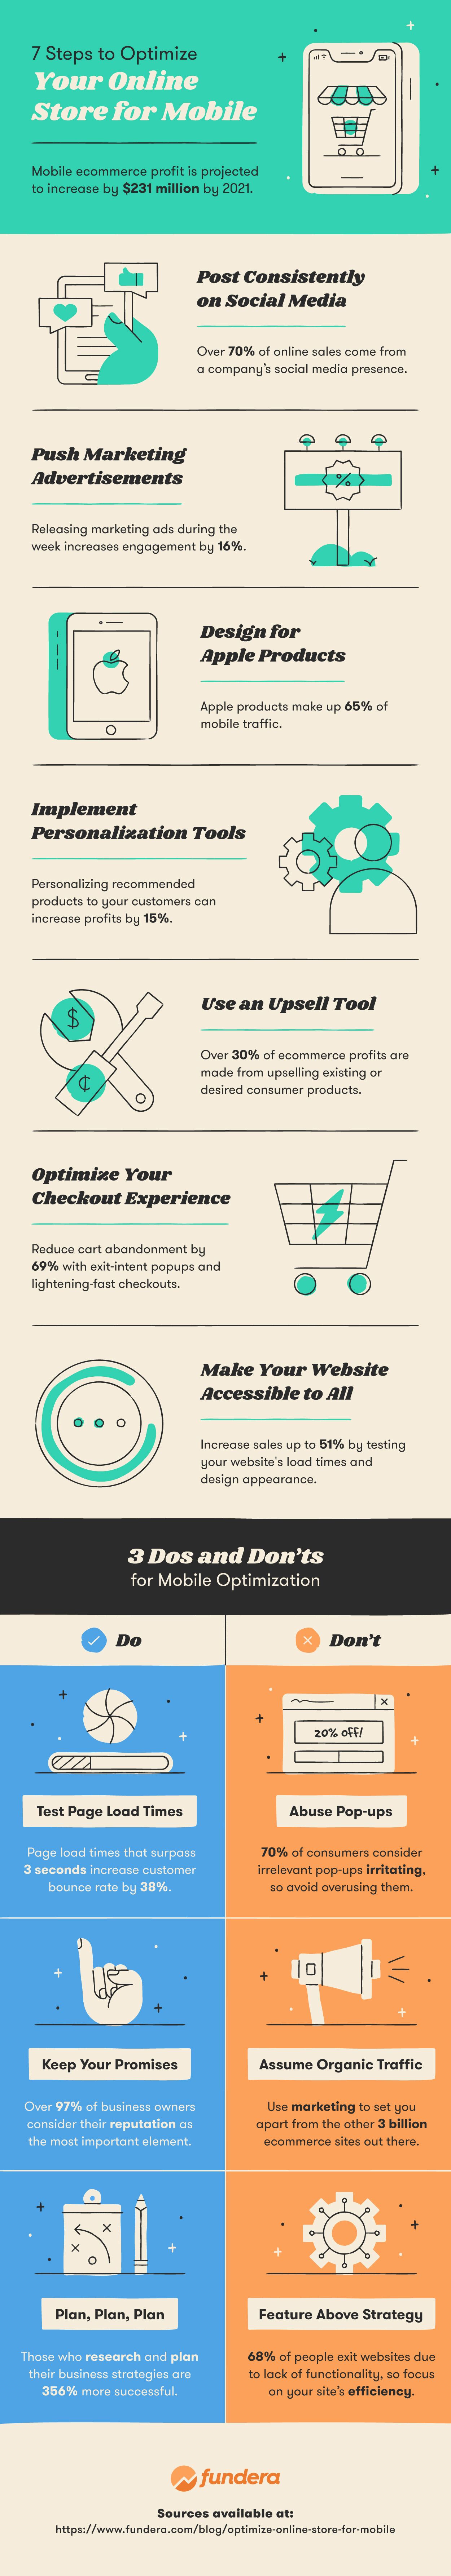 A step-by-step approach to optimizing an online store for mobile